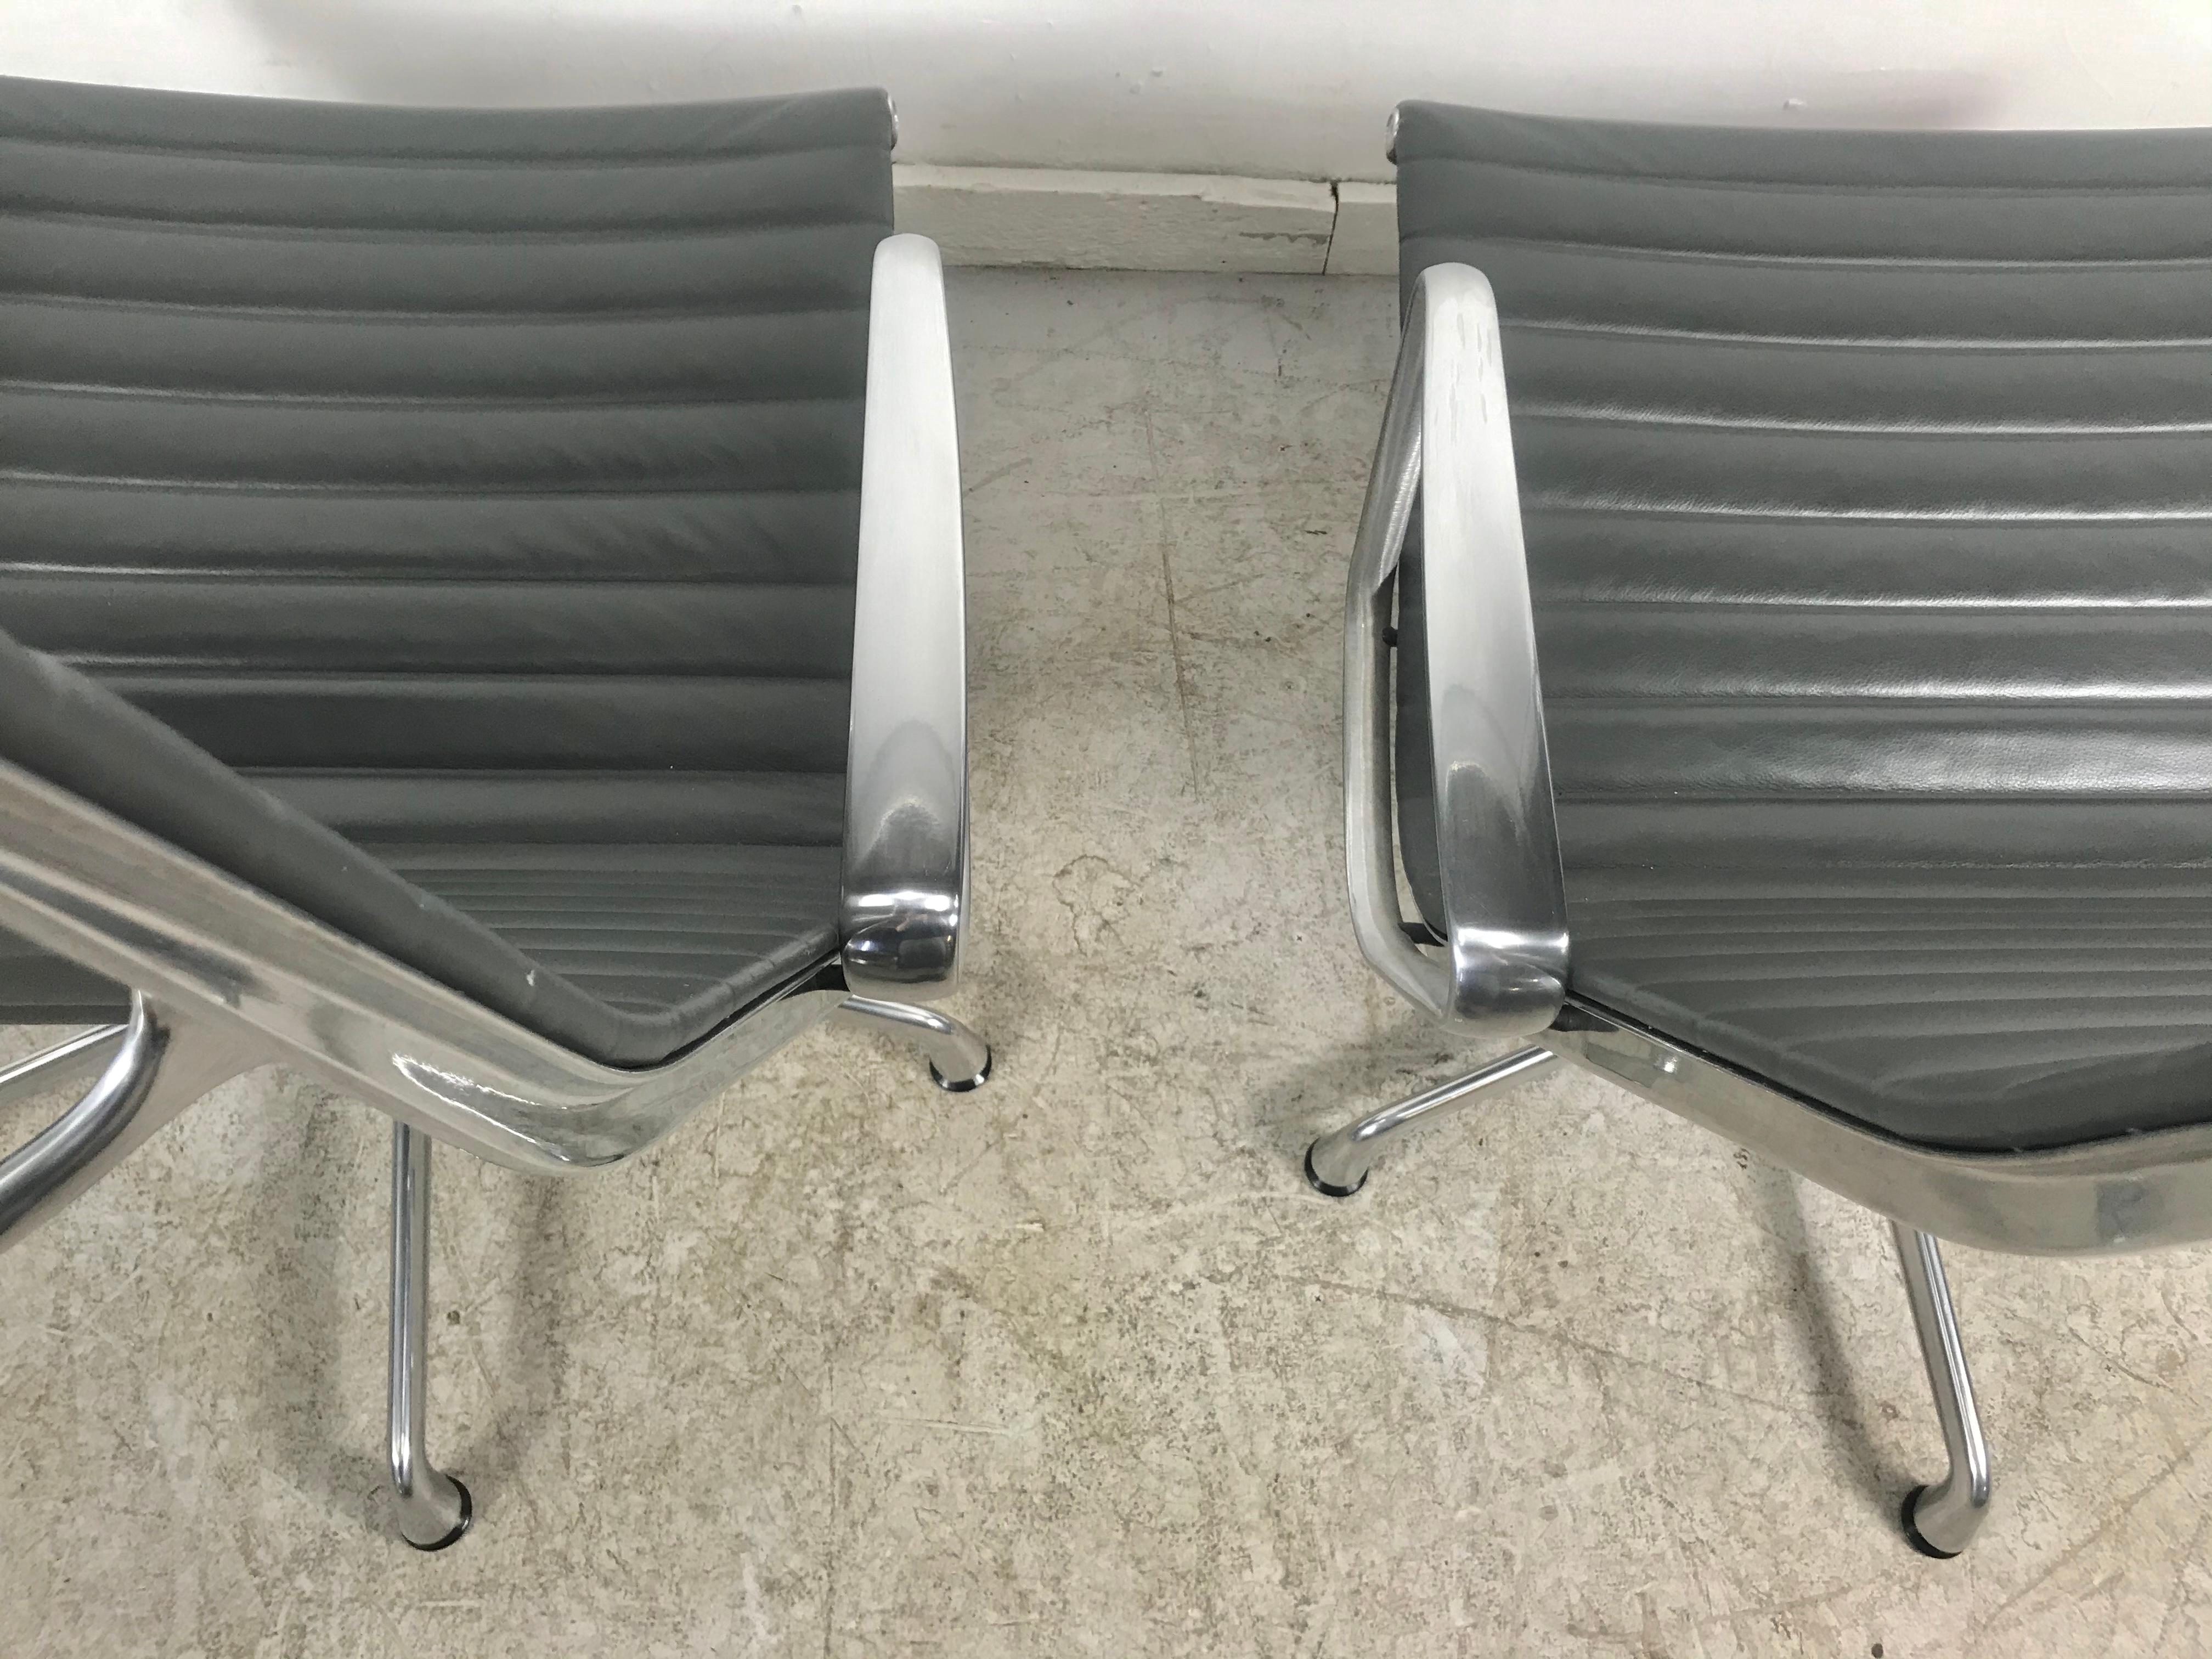 Contemporary Aluminum Group Lounge Chairs by Charles Eames for Herman Miller, Custom Leather